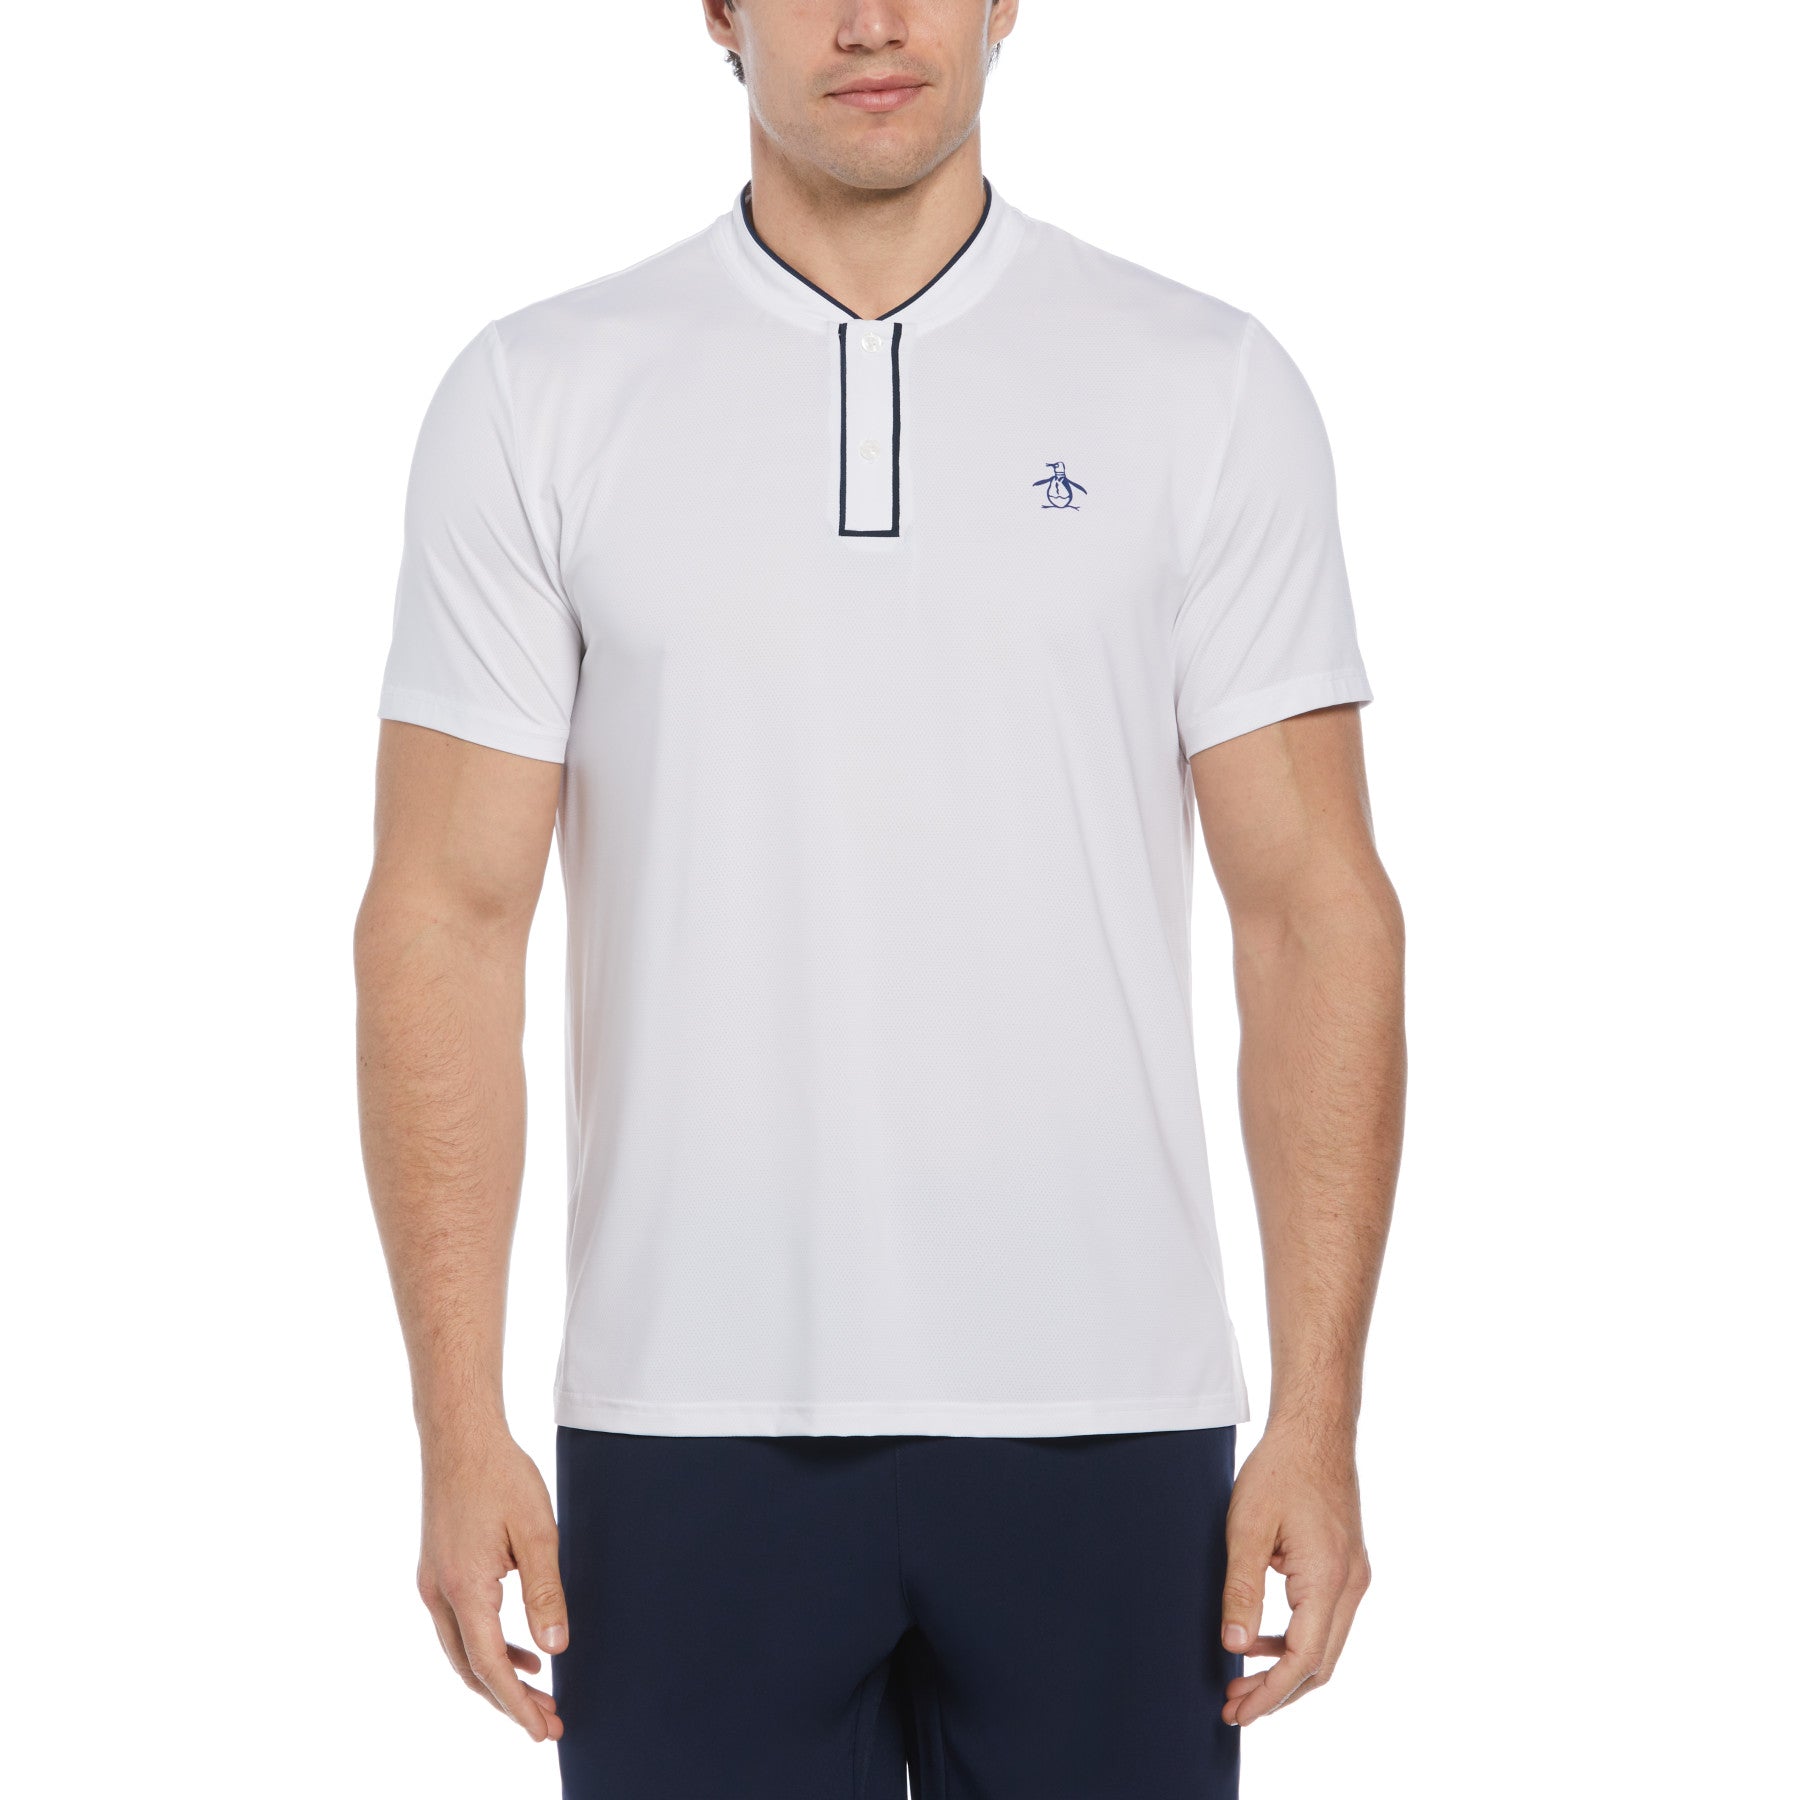 View Piped Blade Collar Performance Tennis Polo Shirt In Bright White information